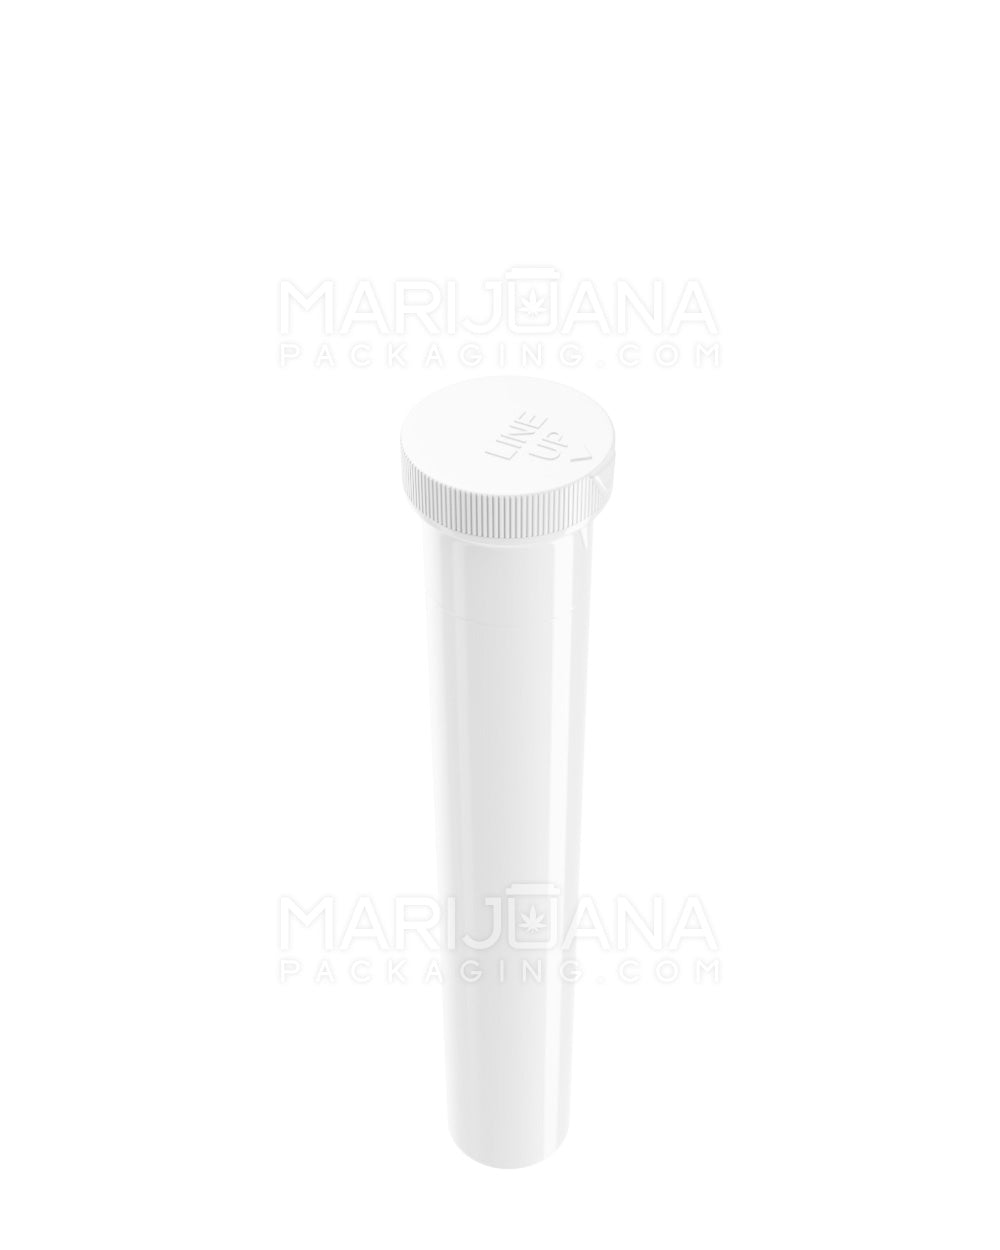 Child Resistant | King Size ‘Line-Up Arrow’ Pre-Roll Tubes | 116mm - Opaque White Plastic - 500 Count - 2